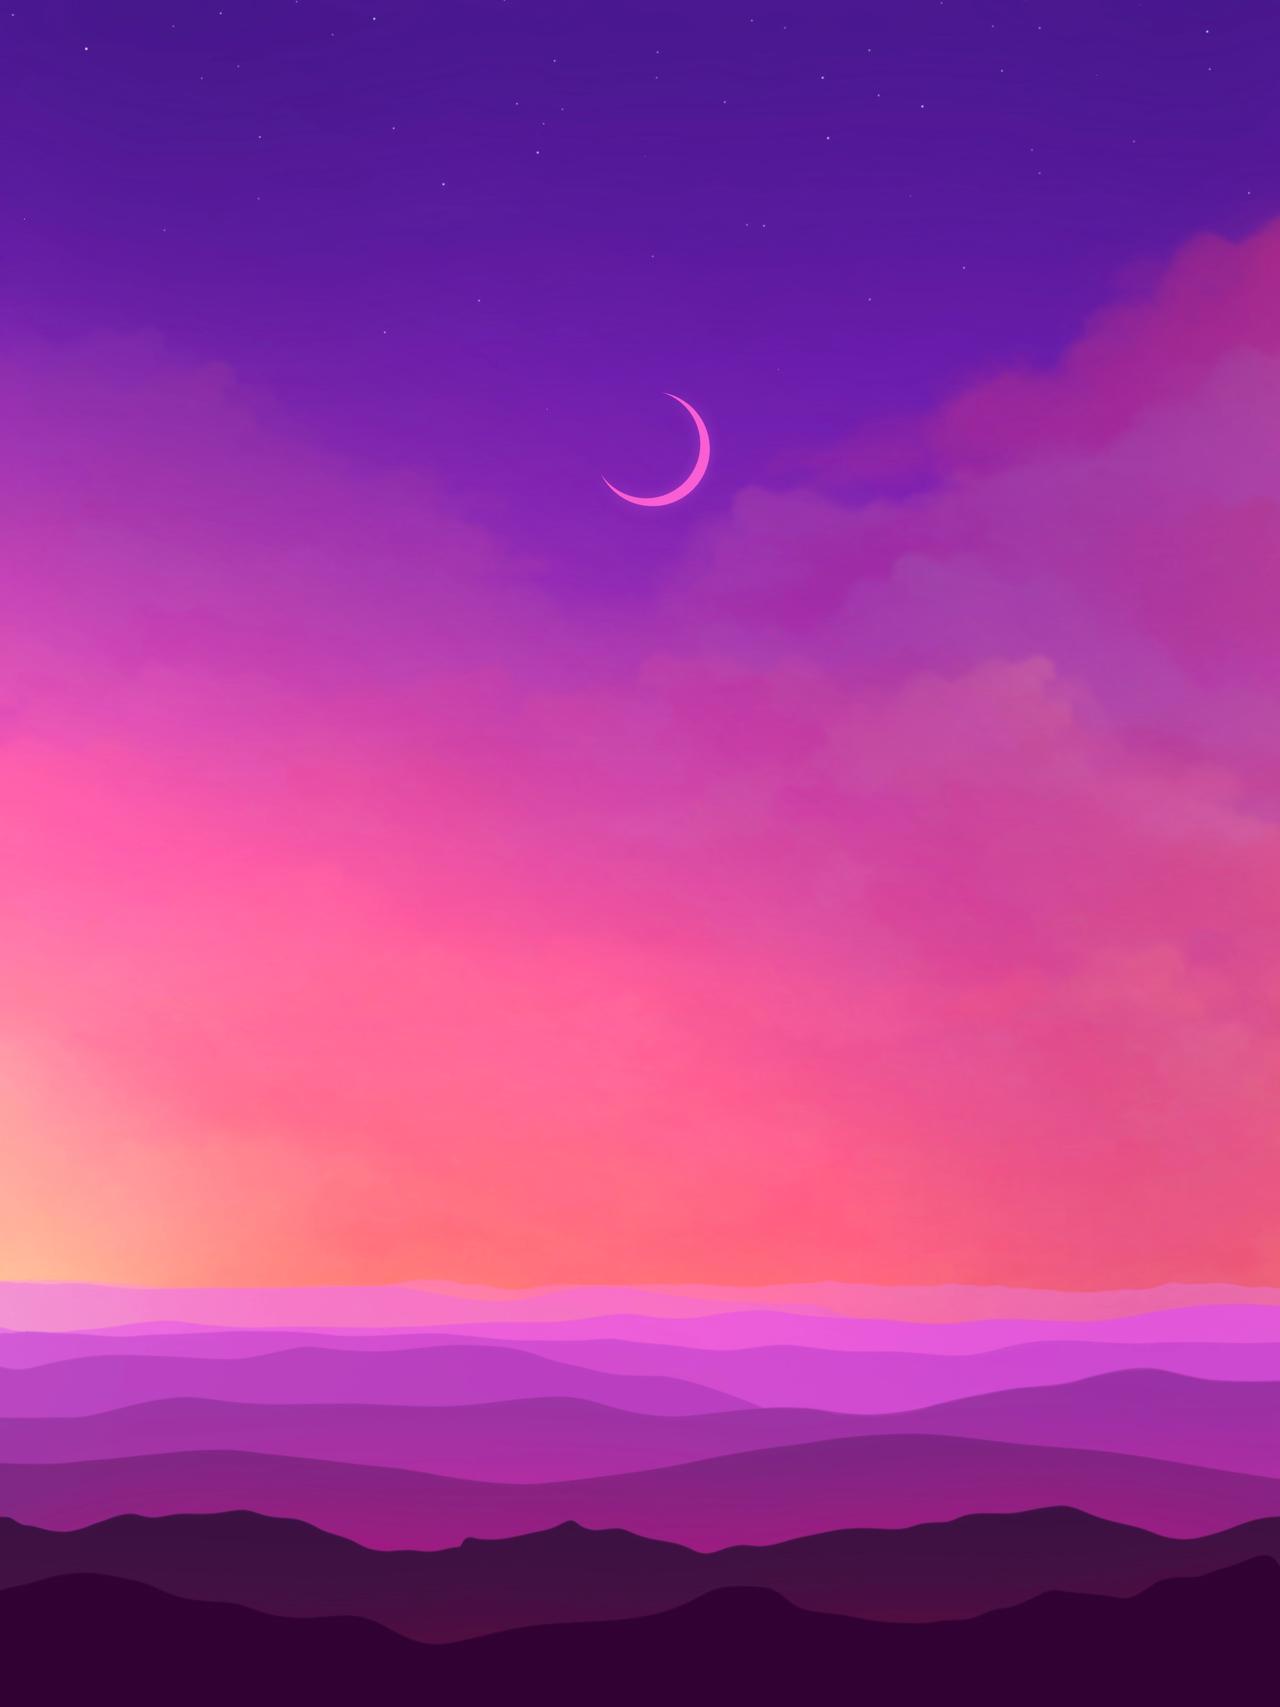 purple, art, moon, violet, hills cell phone wallpapers